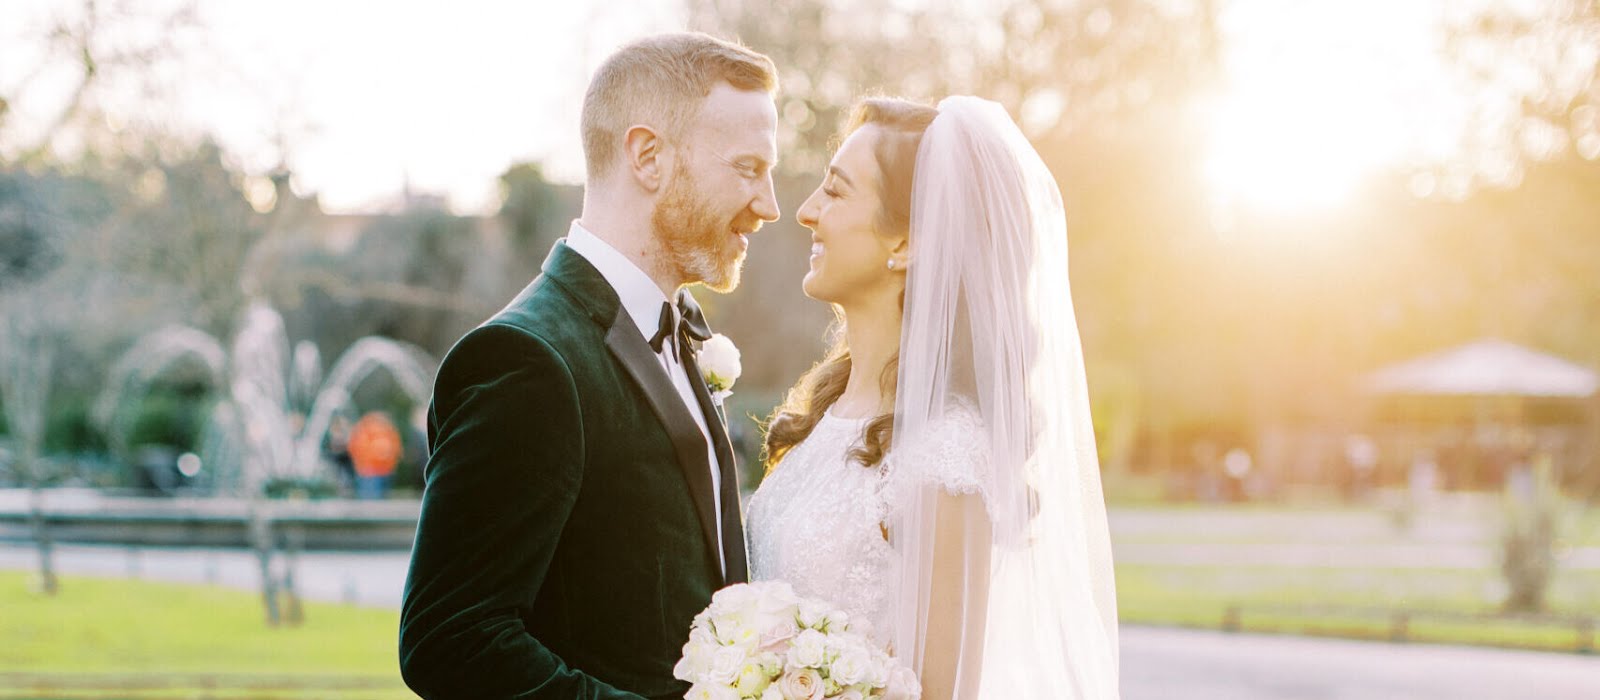 Real Weddings: Claire and Gerry’s winter wedding at The Shelbourne